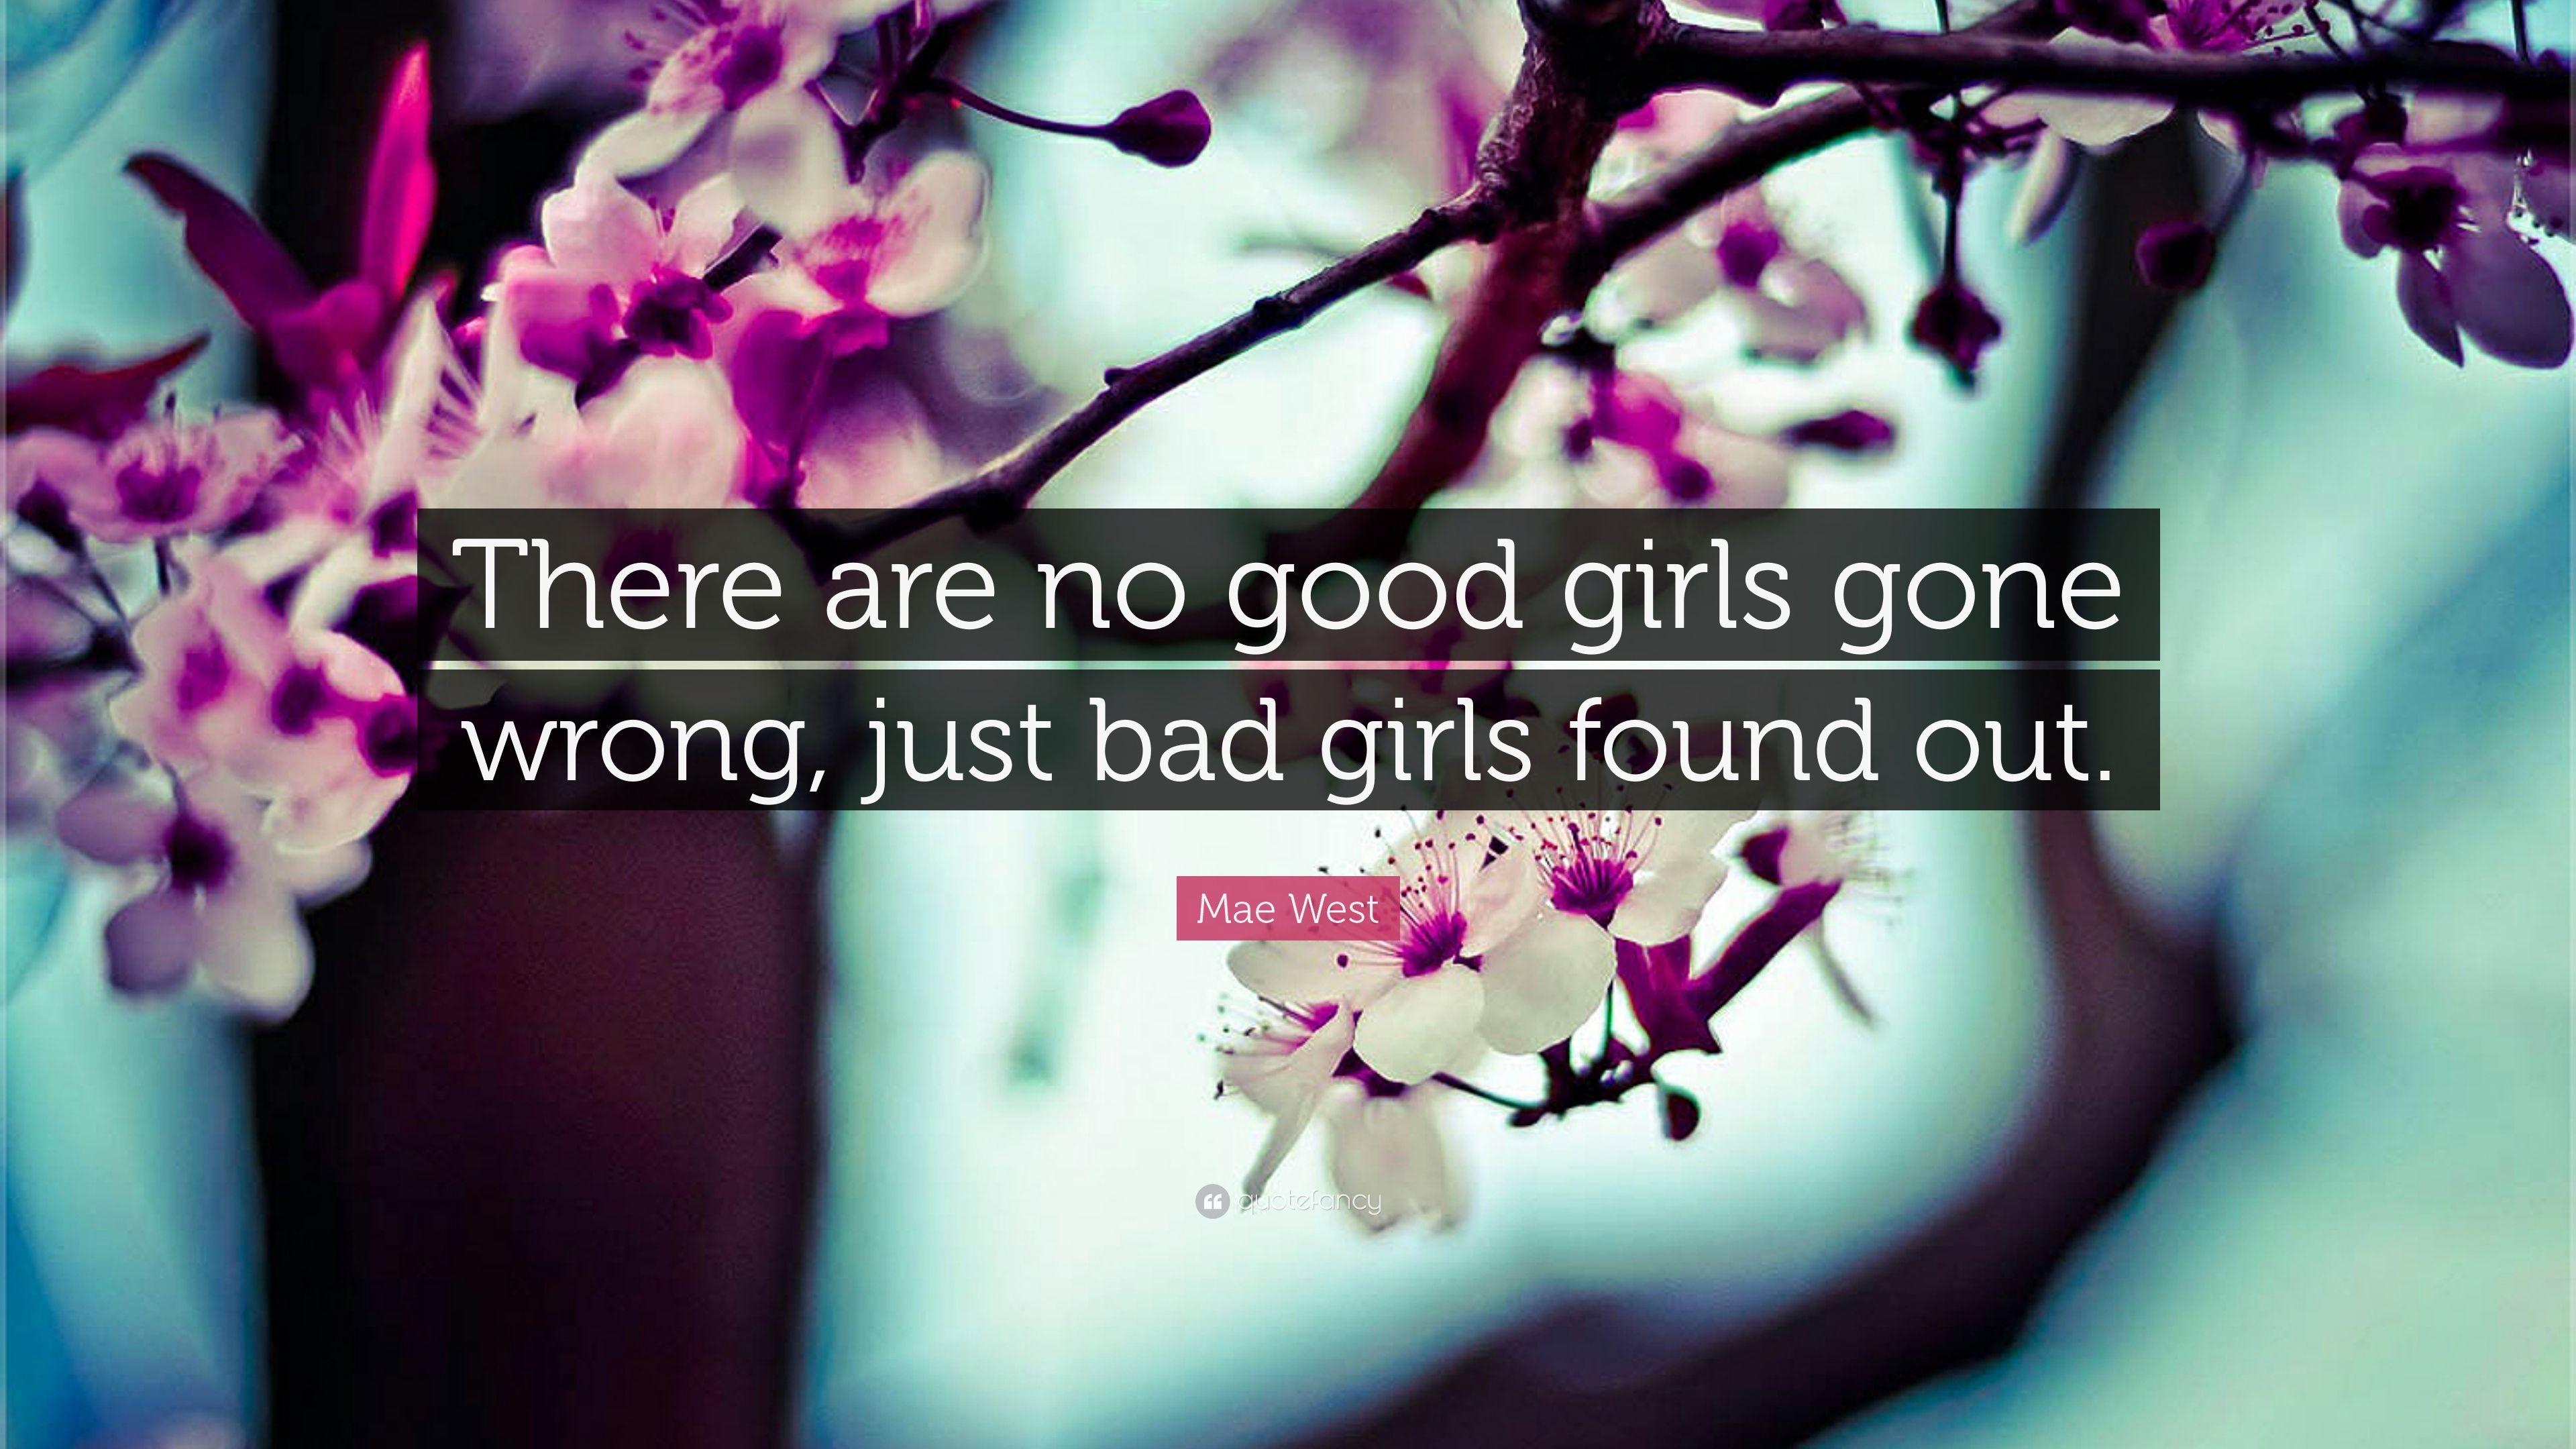 Mae West Quote: “There are no good girls gone wrong, just bad